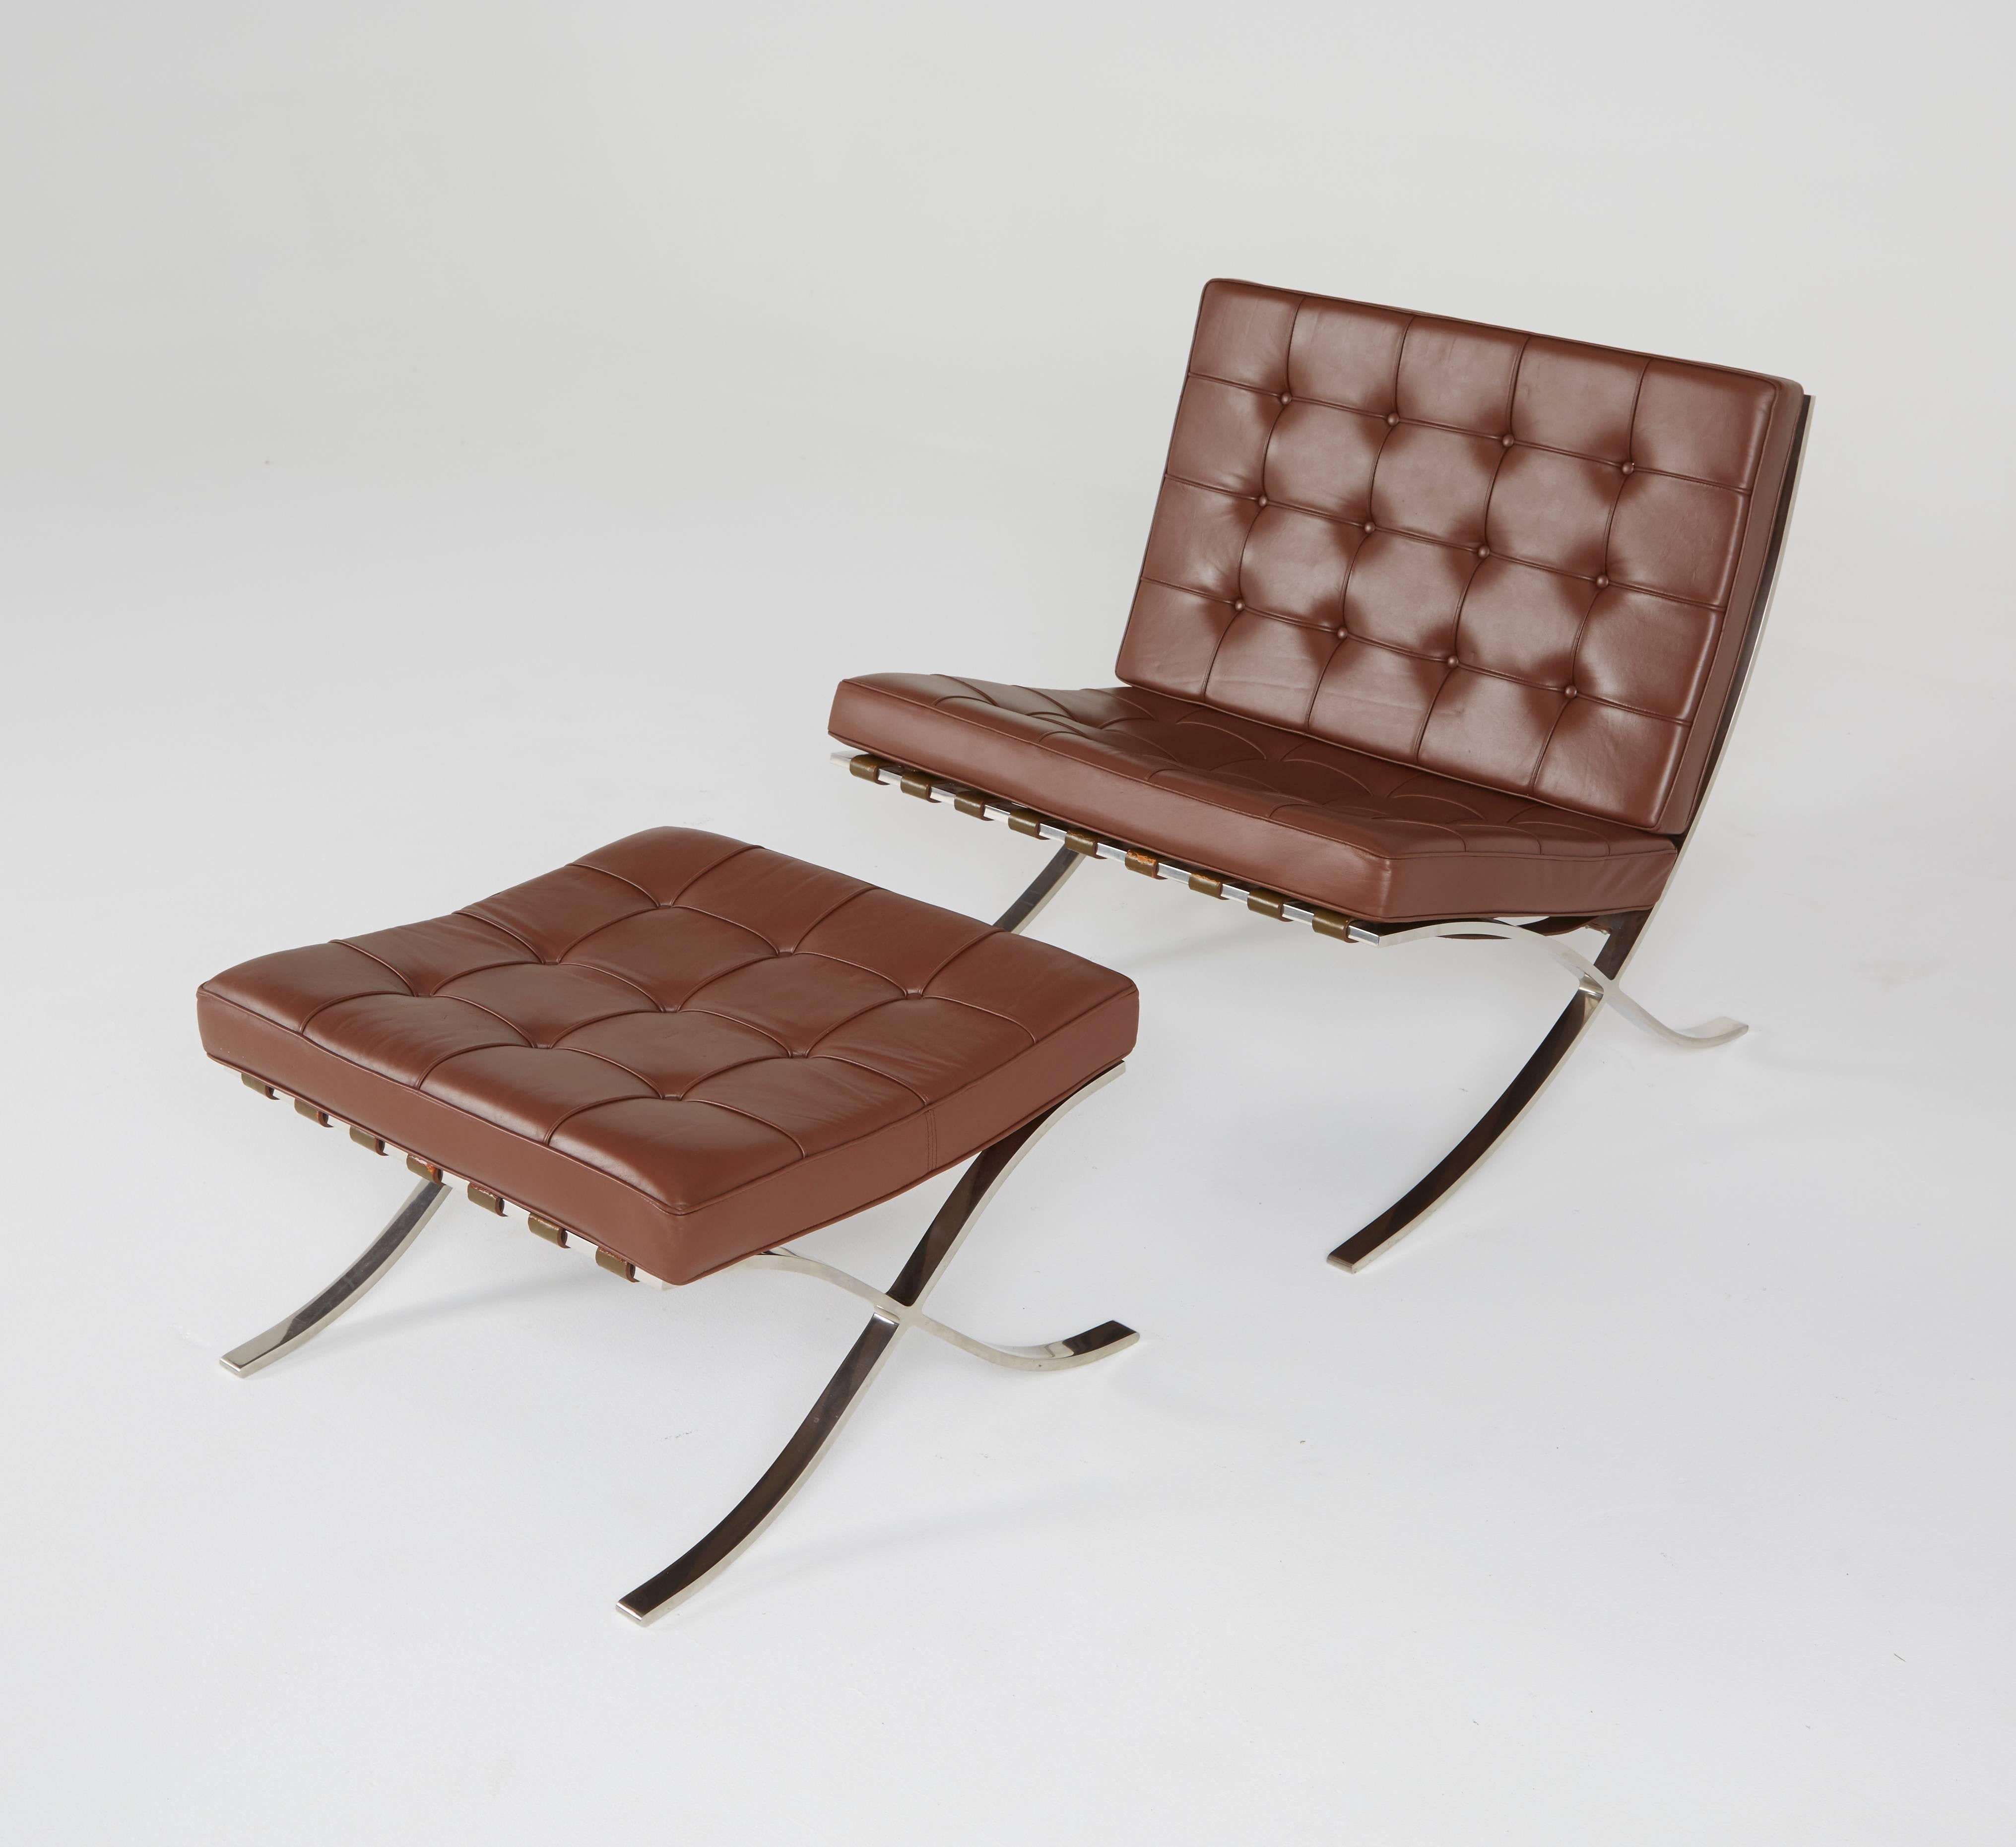 Leather Barcelona Lounge and Ottoman by Mies van der Rohe for Knoll, 1978 MFG Date